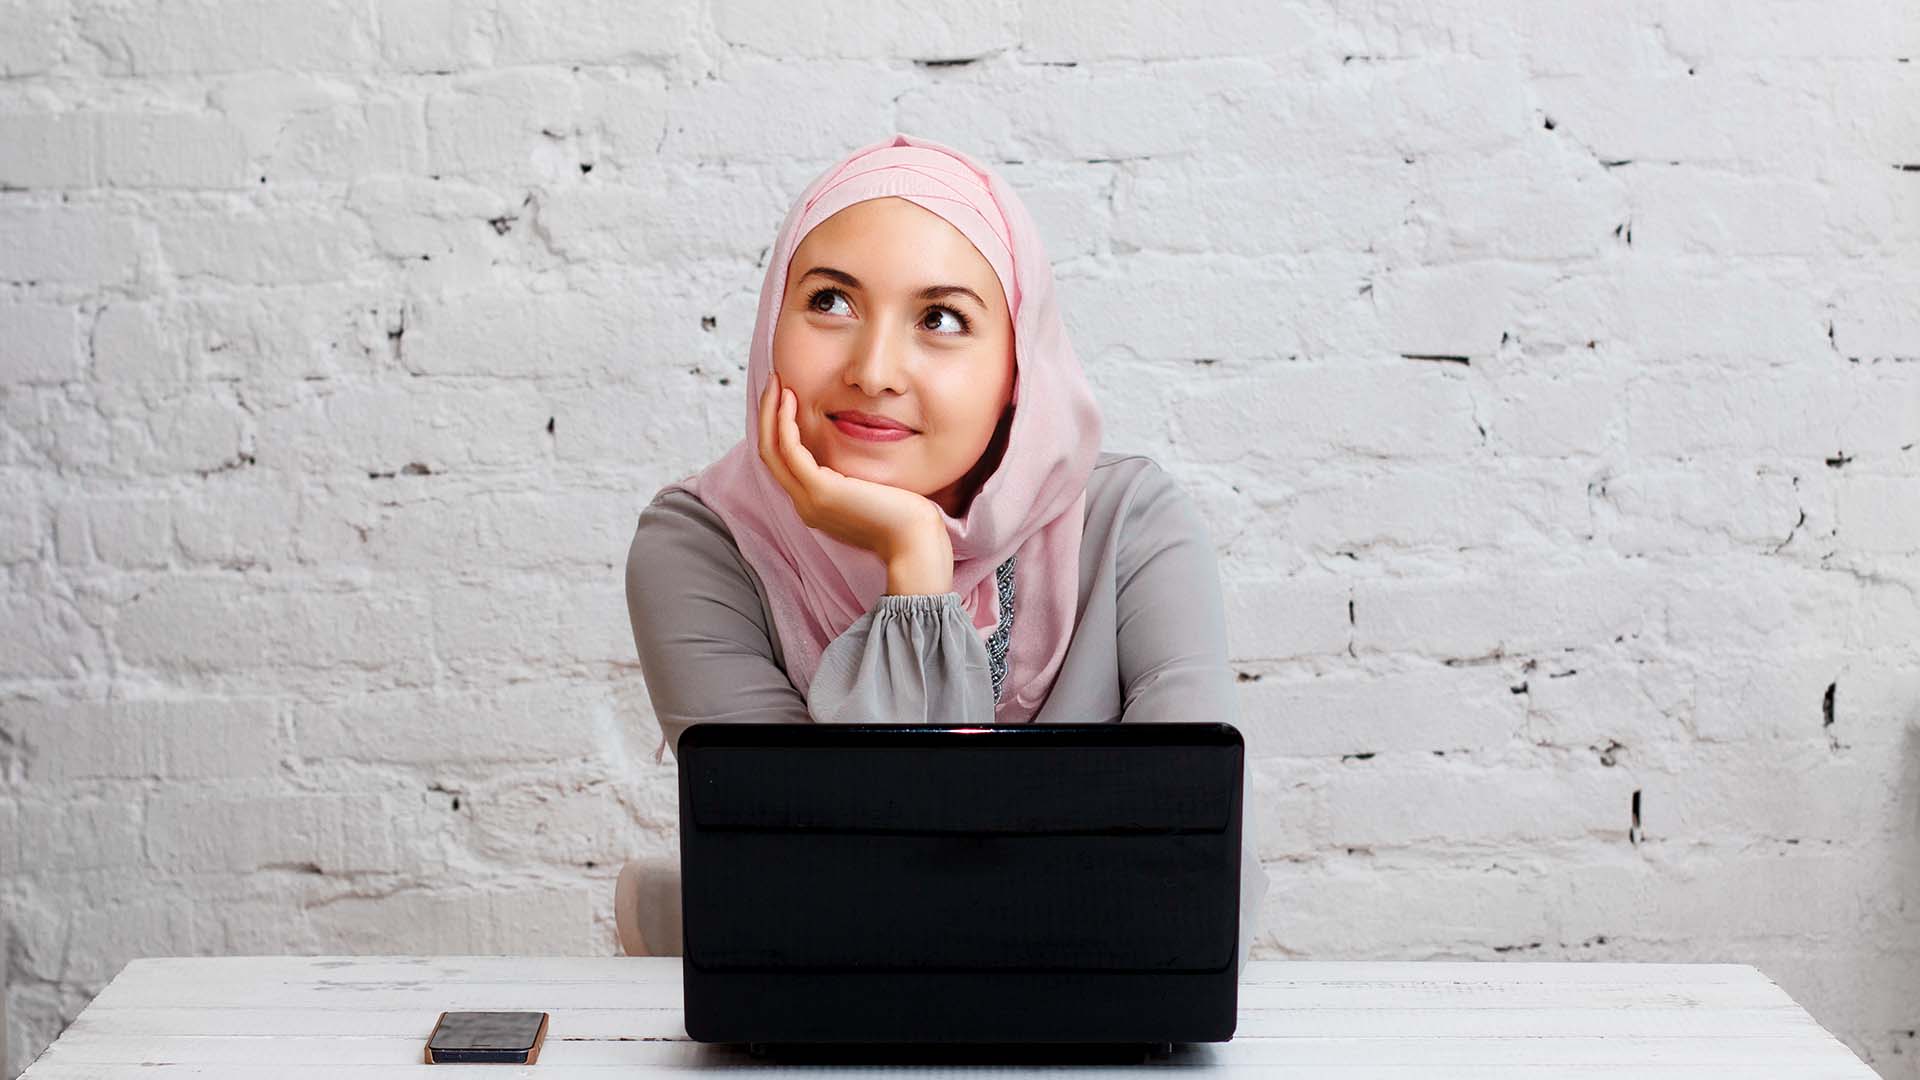 Woman wearing a pink hijab resting head on palm, with laptop and phone in front of her, thinking. White brick wall background